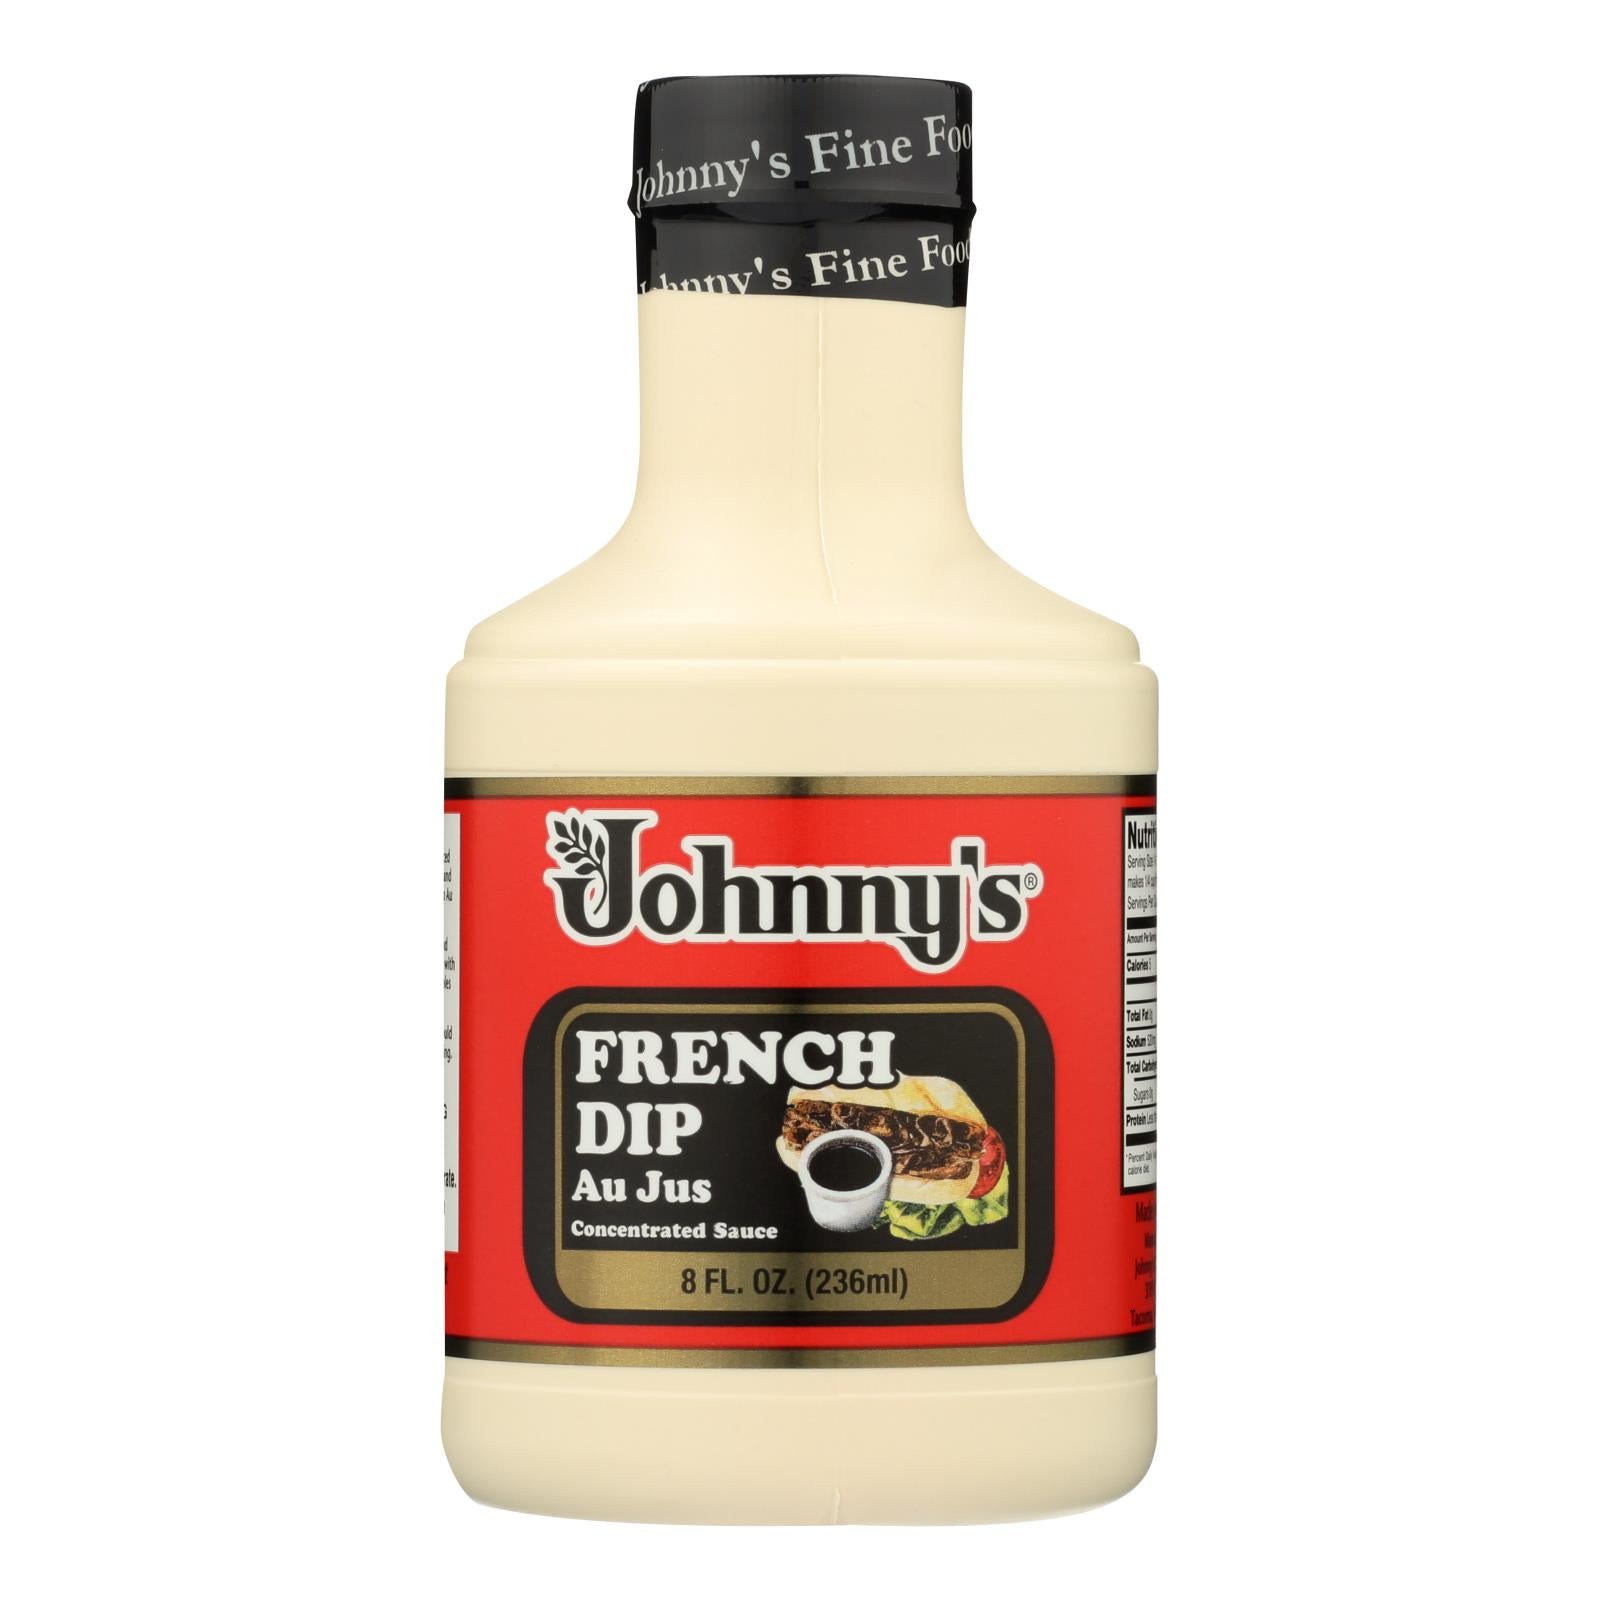 Johnny'S, Johnny's - French Dip Au Jus Concentrated Sauce - Case of 6 - 8 oz. (Pack of 6)